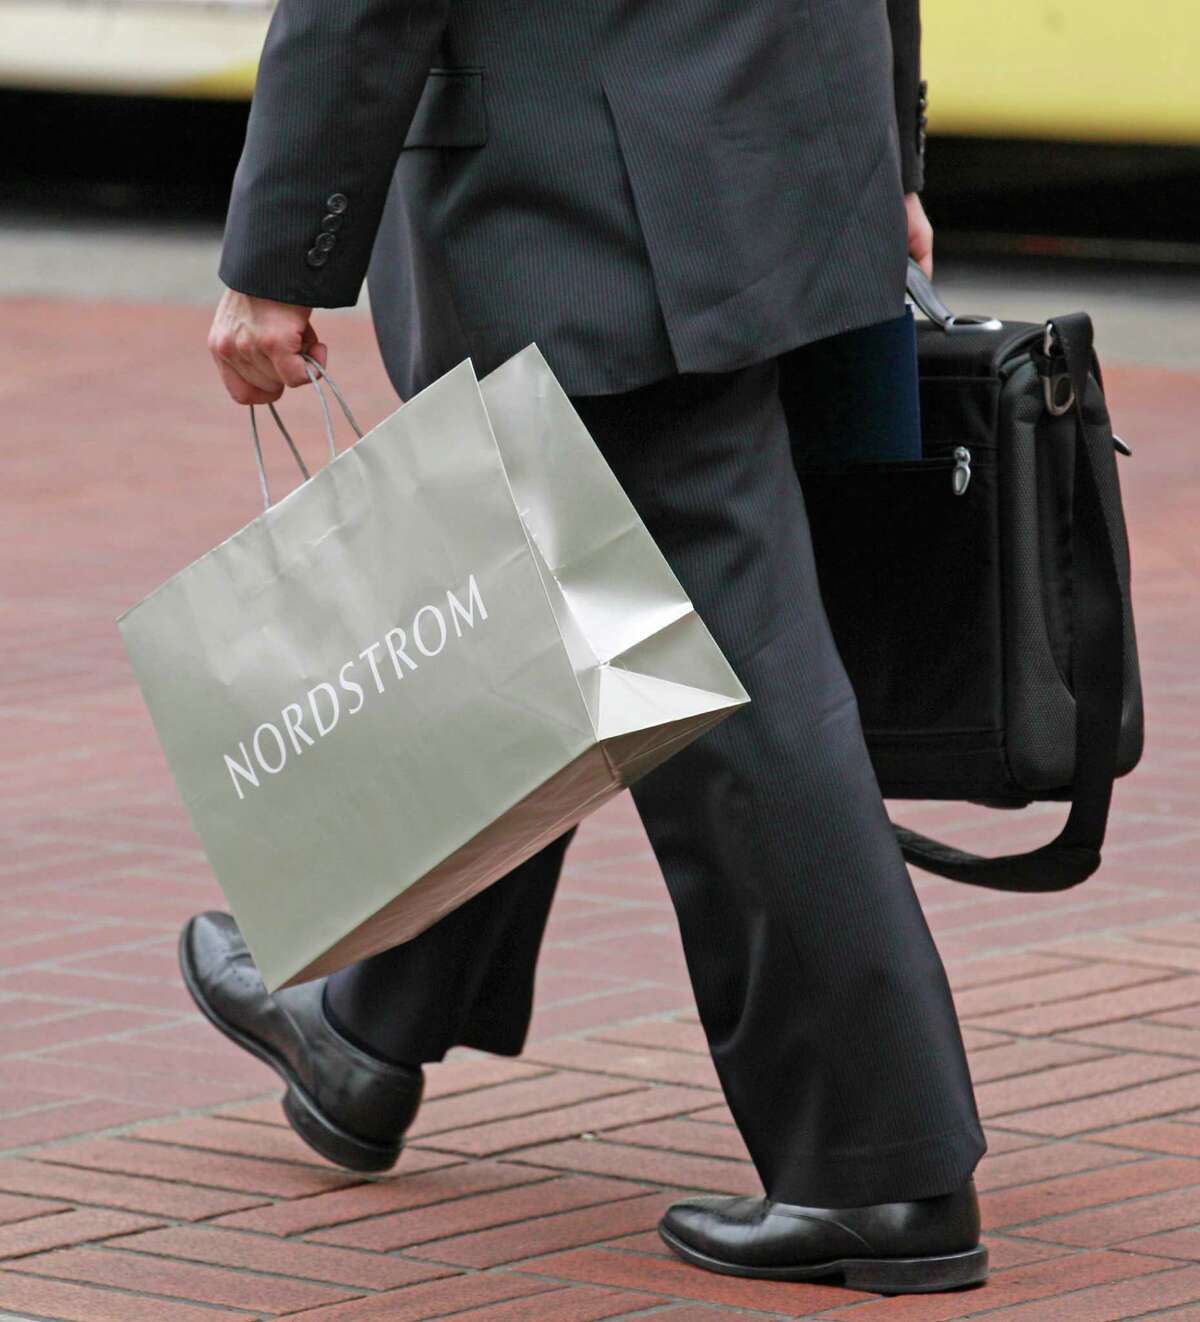 Nordstrom at The Woodlands now open